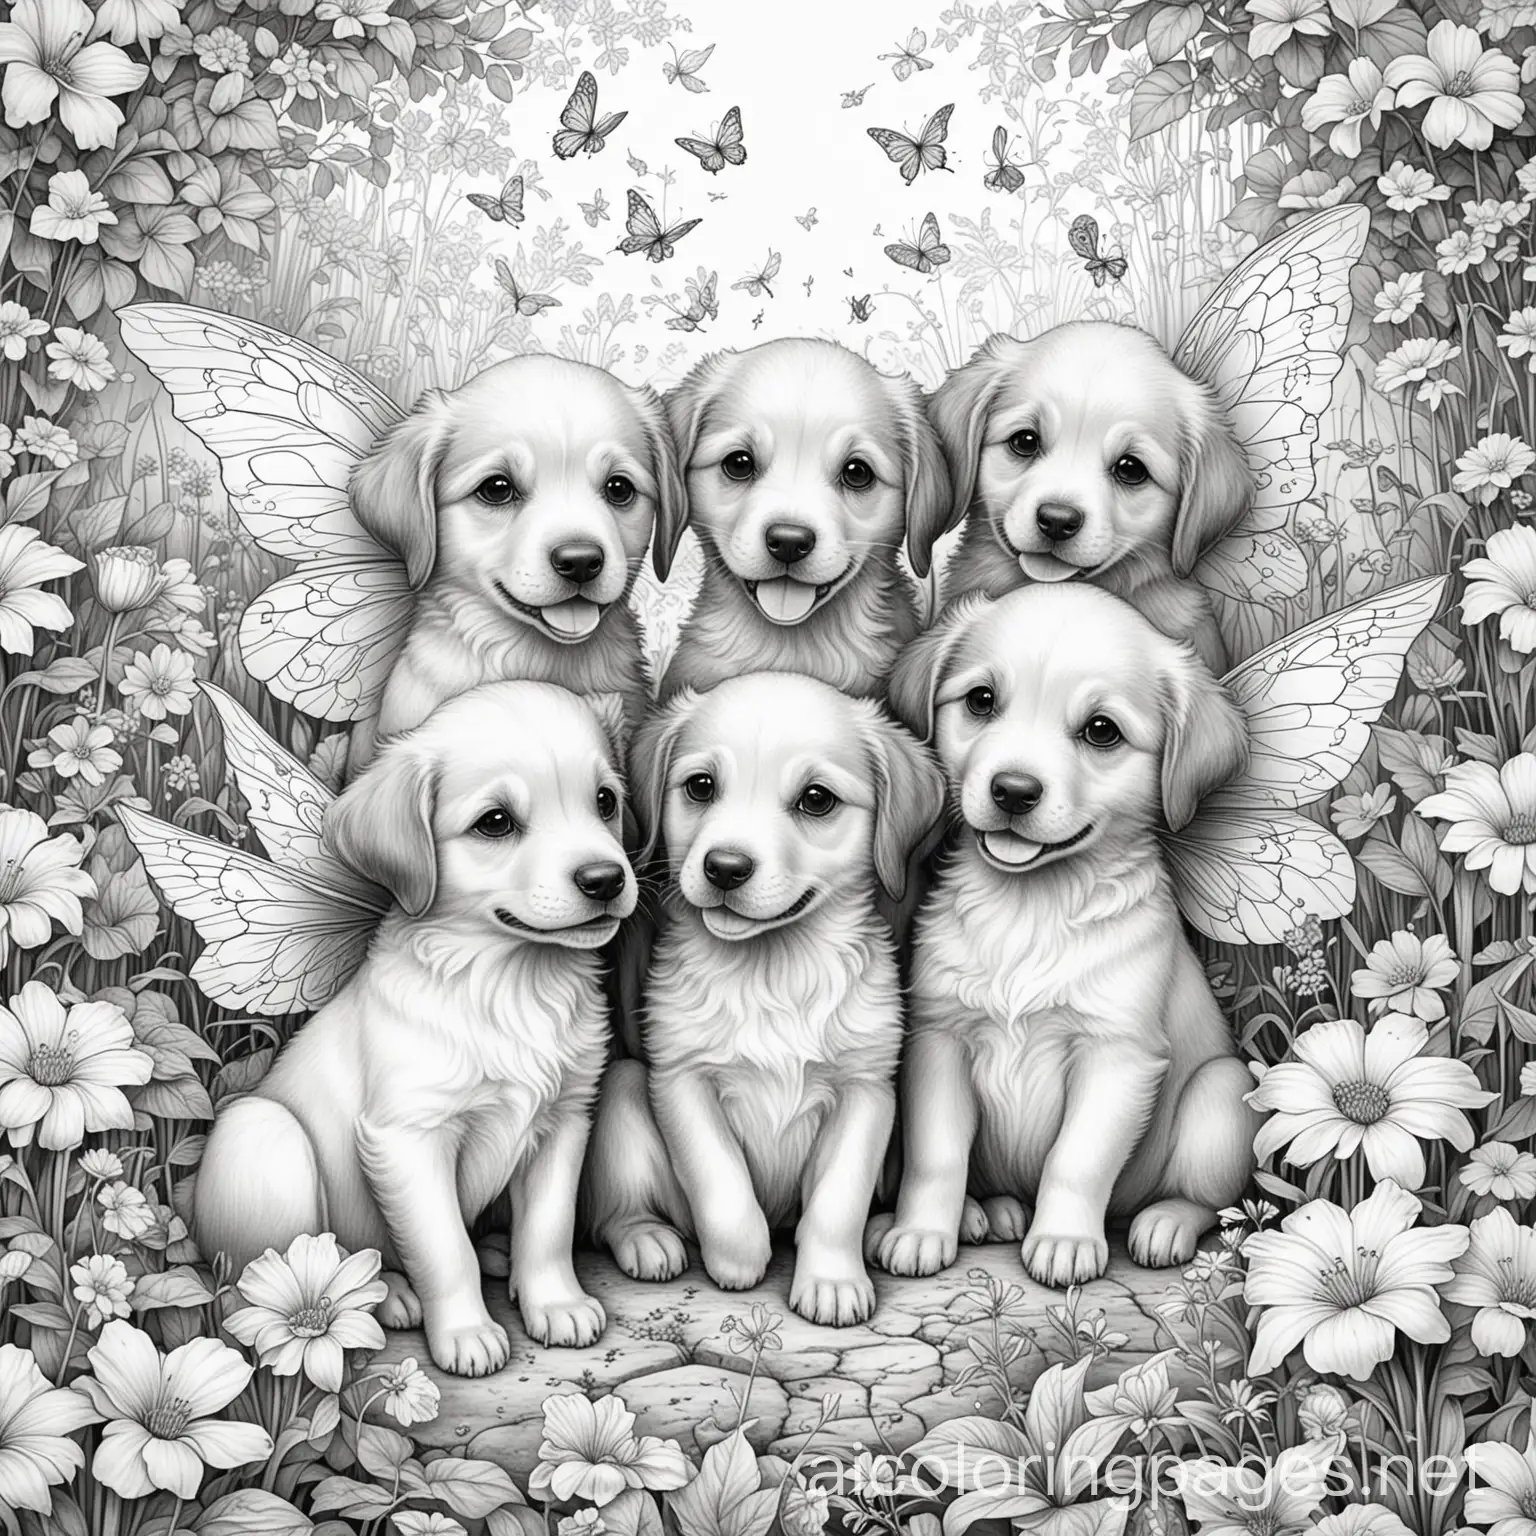 Cheerful-Puppies-and-Friendly-Fairies-Frolic-in-Flower-Garden-Coloring-Page